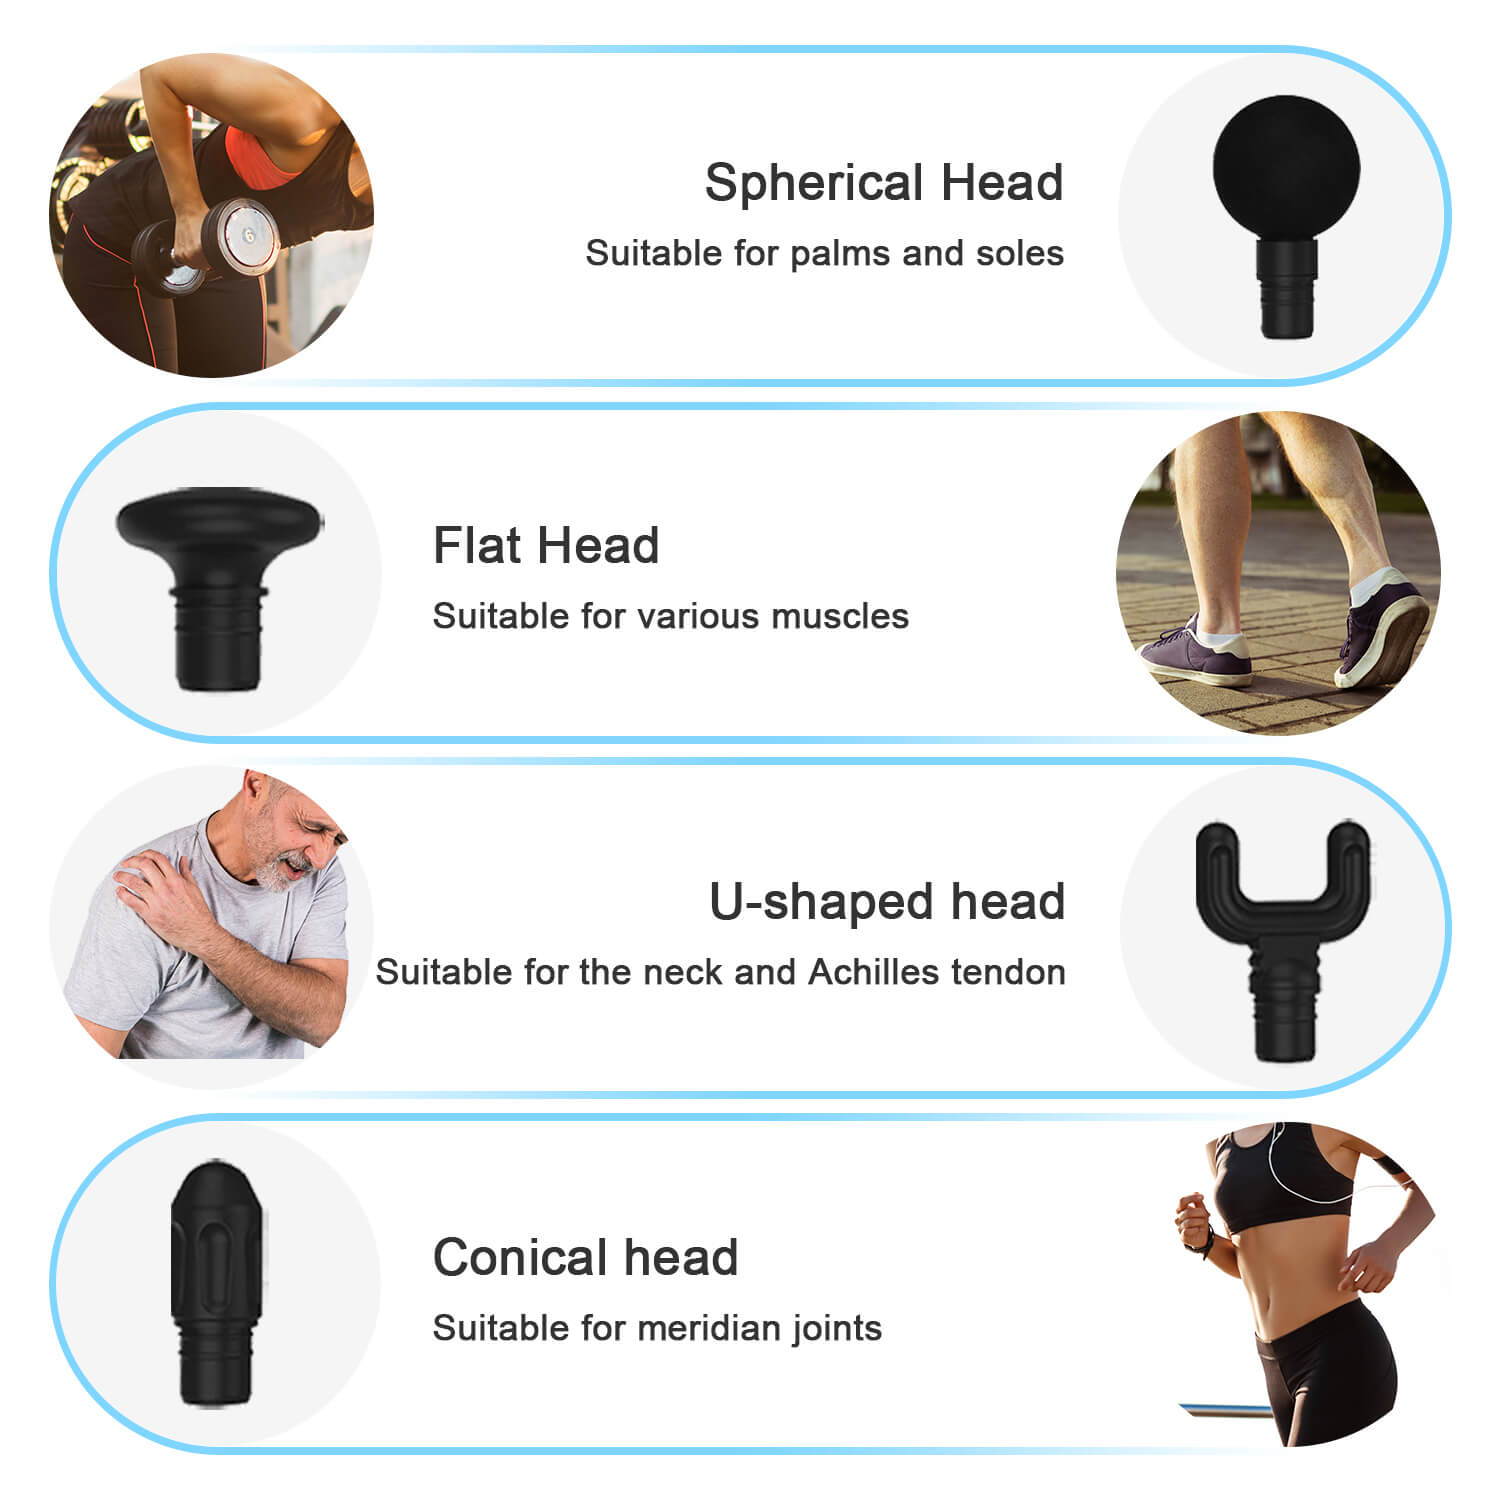 Masaage Gun. Handheld Deep Tissue Massager. Double-Head Massage Gun. Professional Deep Tissue Massage Gun for Pain Relief. Effectively Relief Muscle Soreness. Portable Body Muscle Massager. Massage Gun for Athletes. Portable Body Muscle Massager.